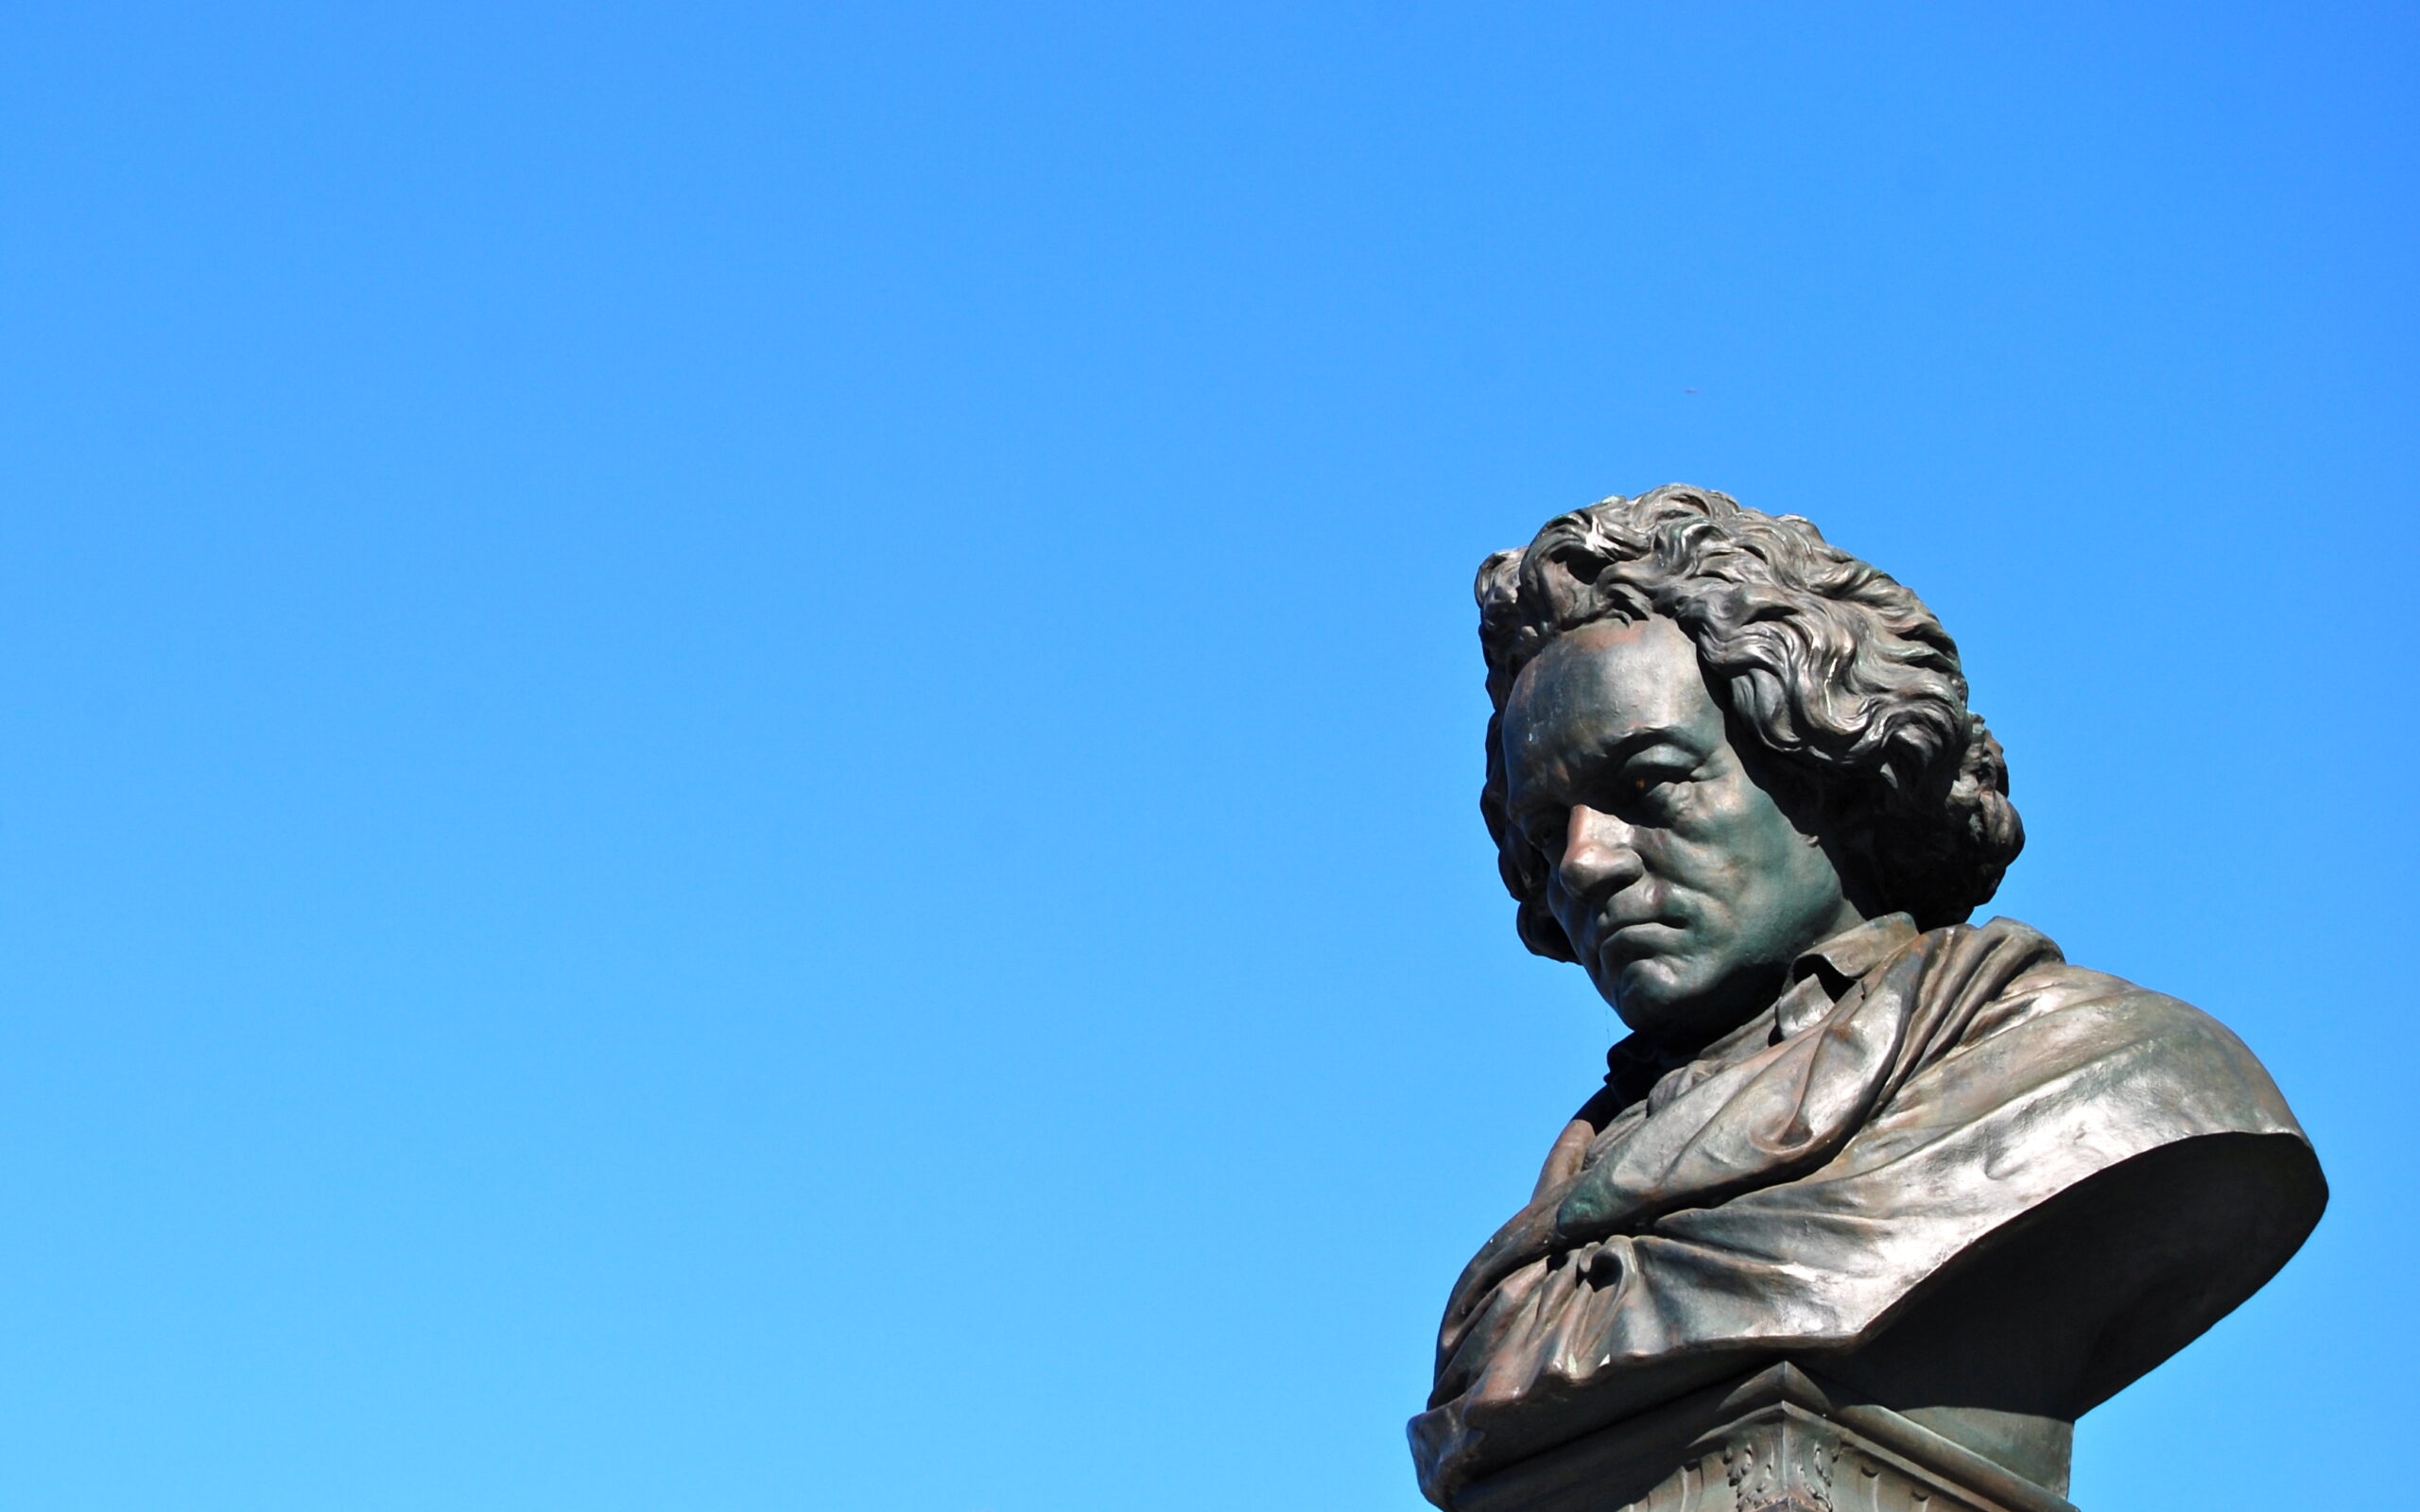 Beethoven Turns 250 This Year And WPR’s Music Staff Are Celebrating